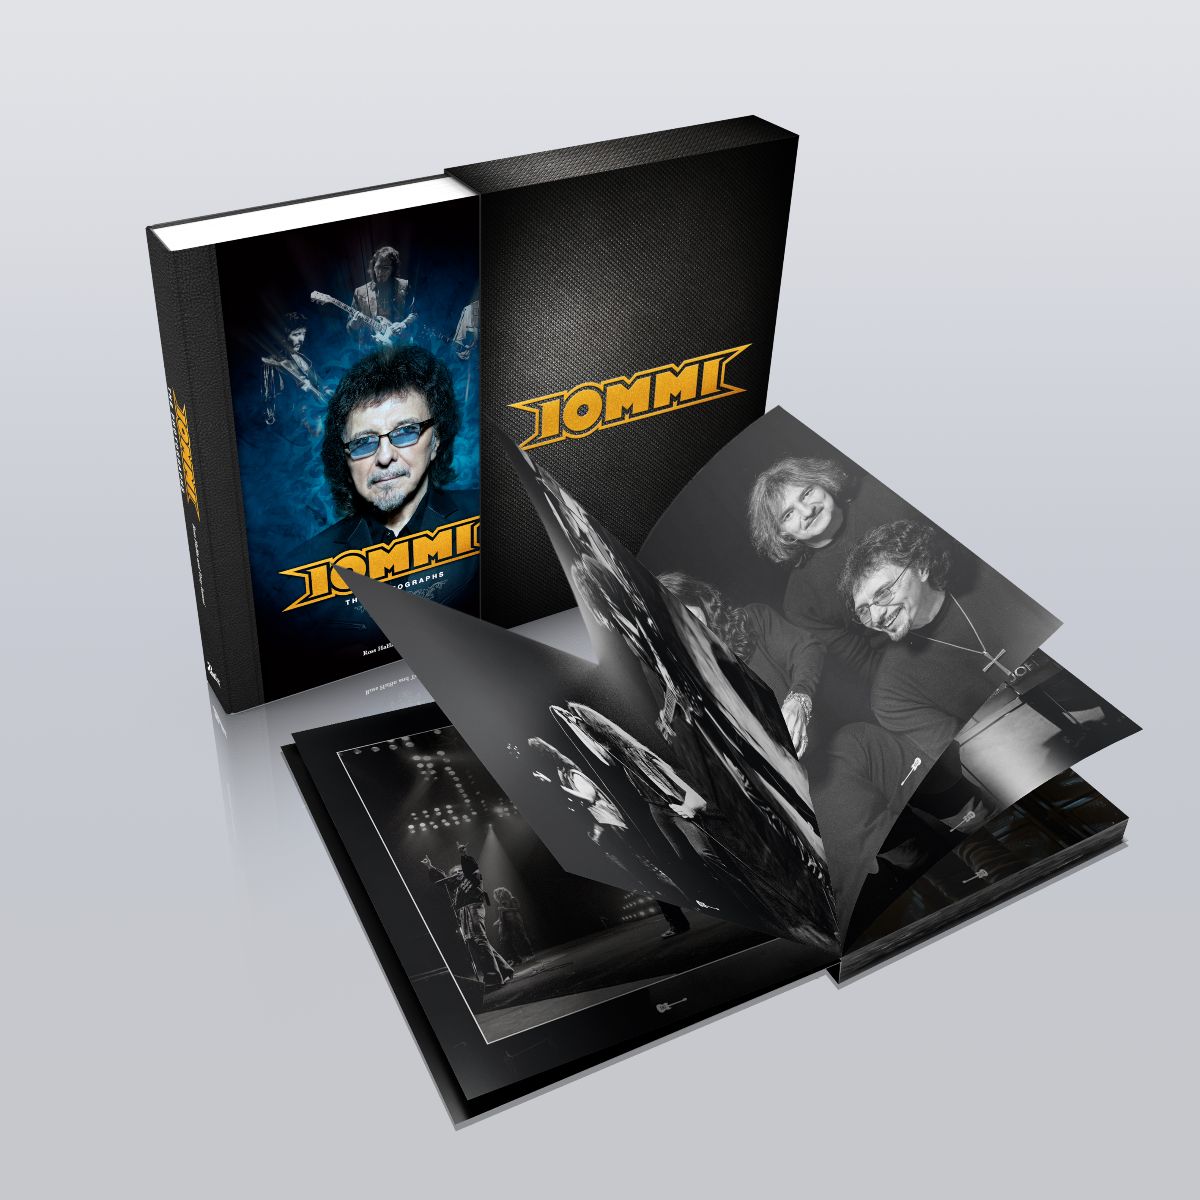 Rufus Publications is proud to present  IOMMI – The Photographs  features exclusive written contributions from Ozzy Osbourne, Sir Brian May, James Hetfield, Phil Anselmo